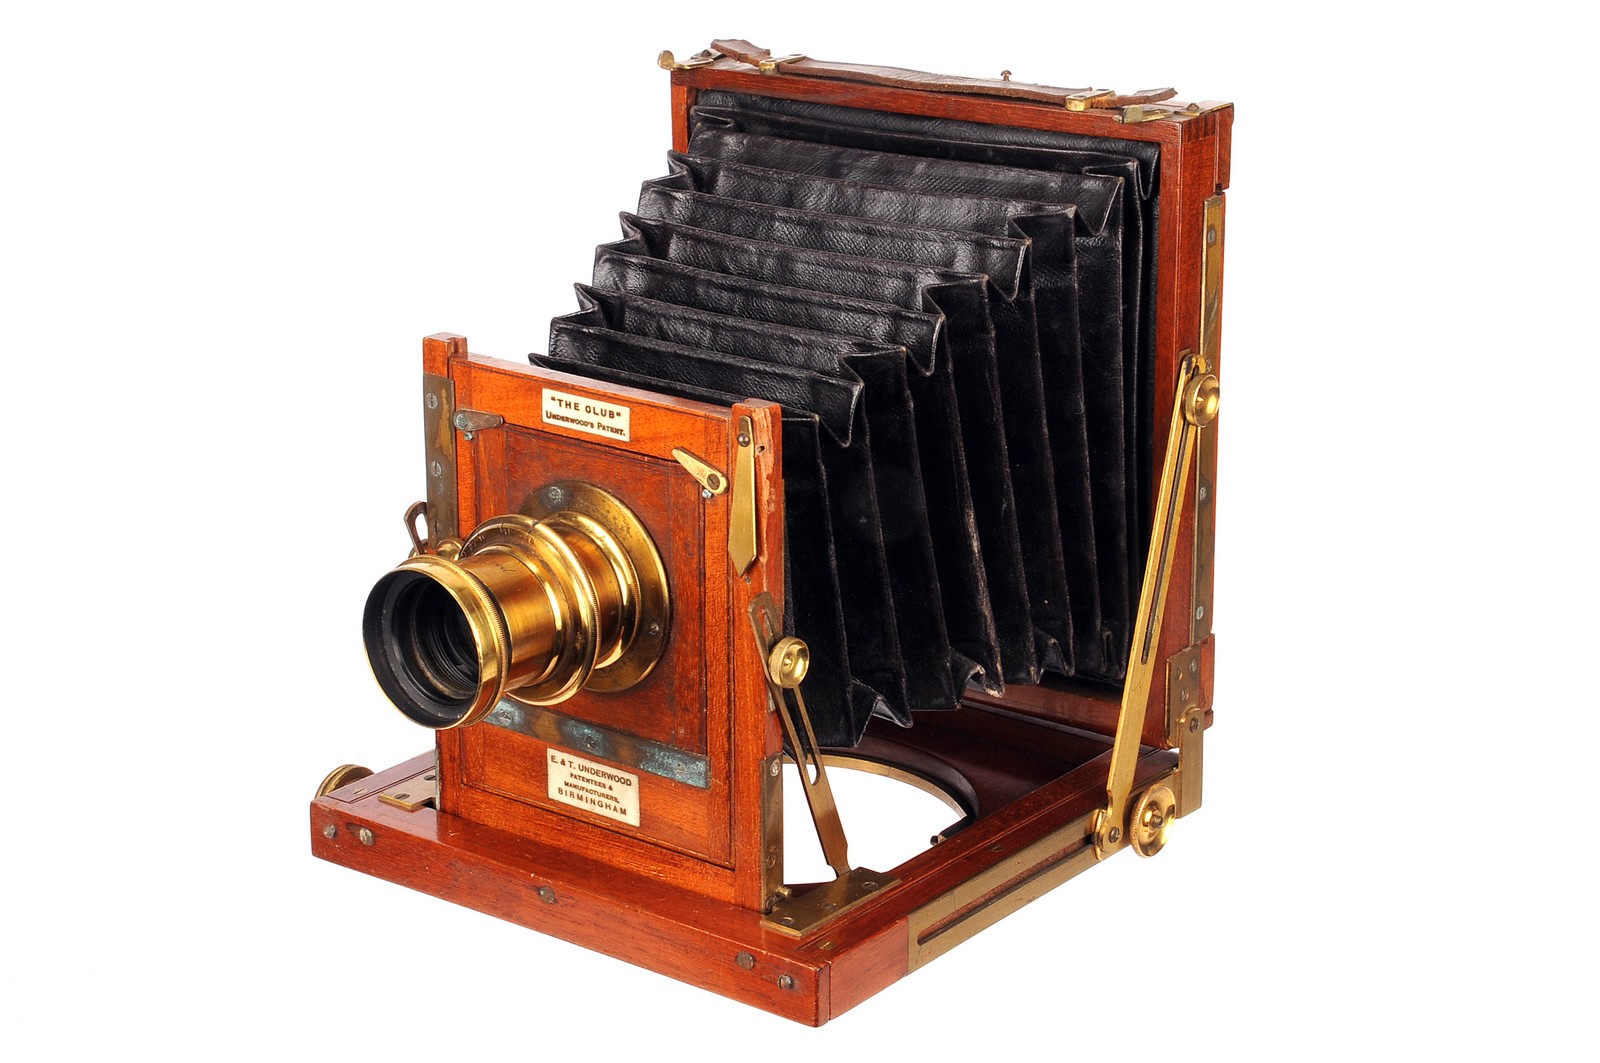 An E & T Underwood ‘The Club’ Mahogany Field Camera, 5x6¼, with E & T Underwood Rapid Rect 1/2 Plate